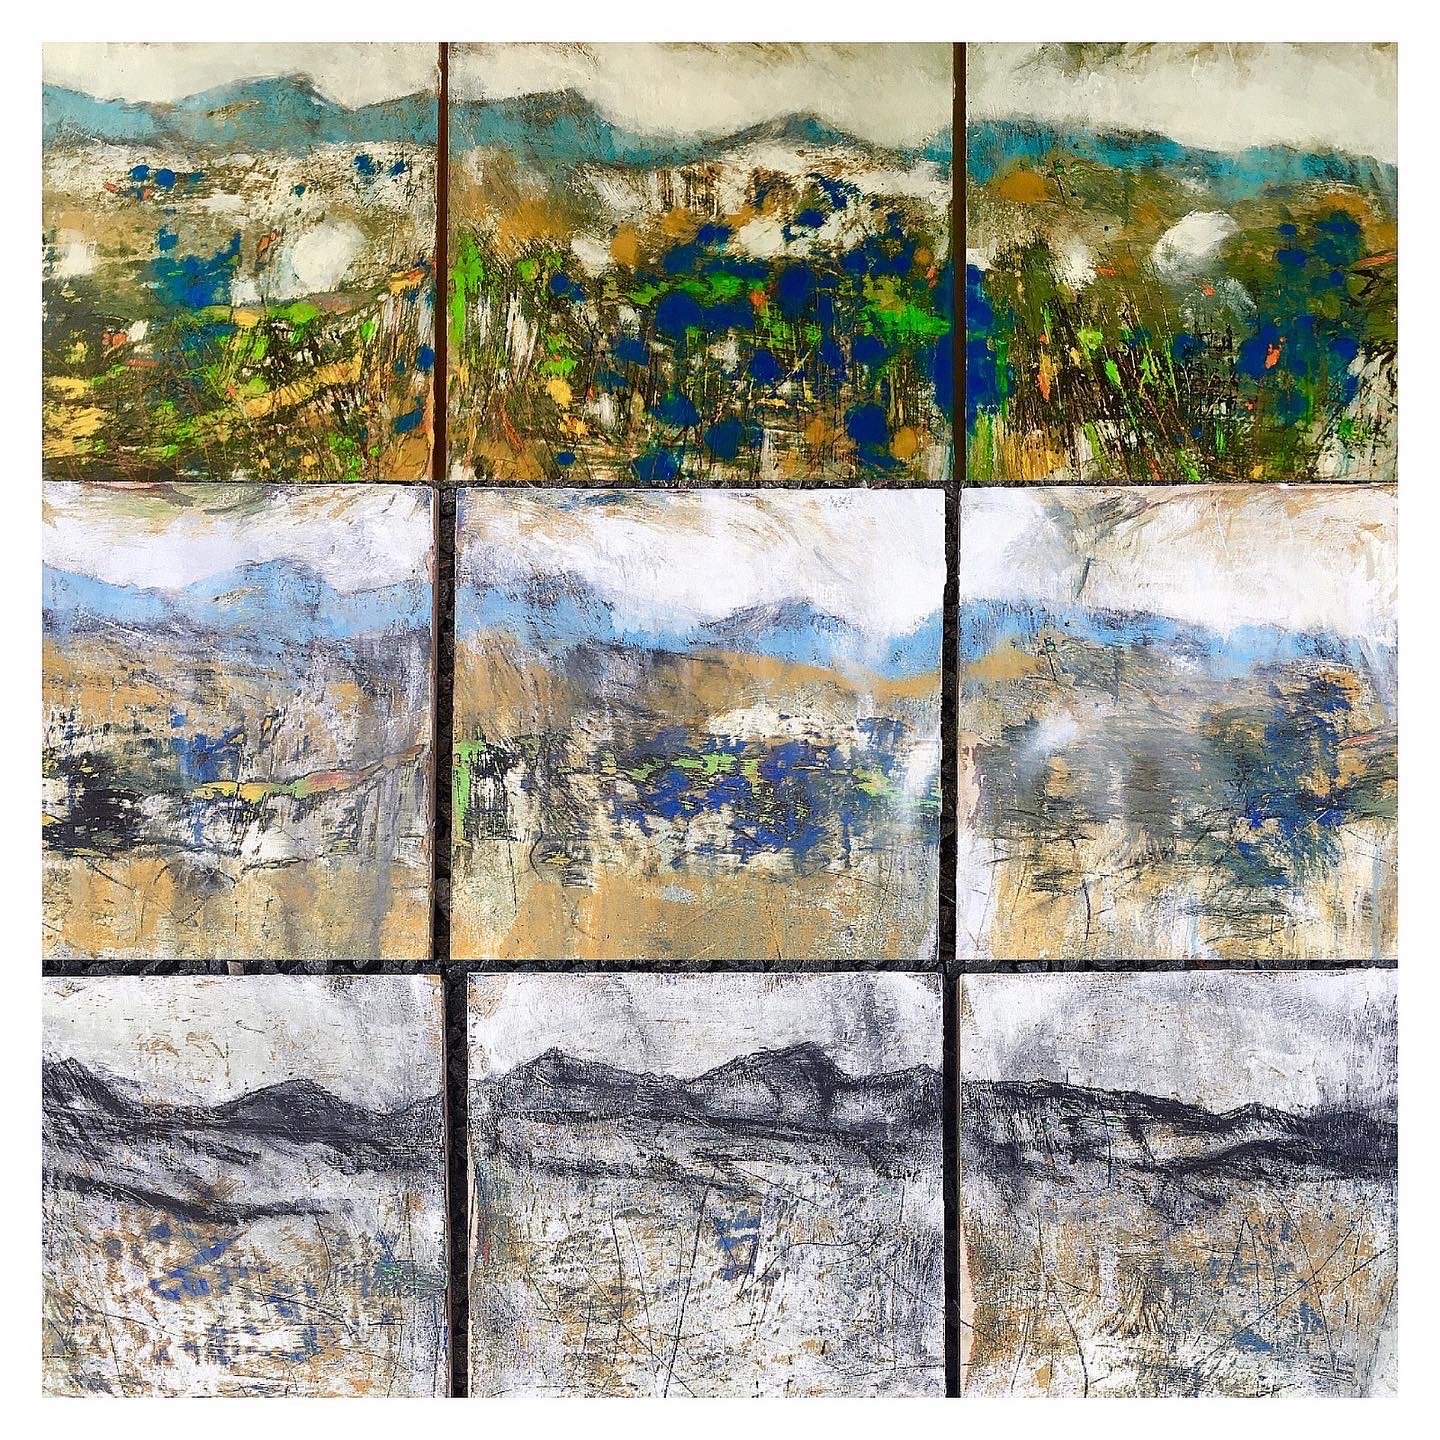 Image showing process of Cader Idris Triptych from bottom to top